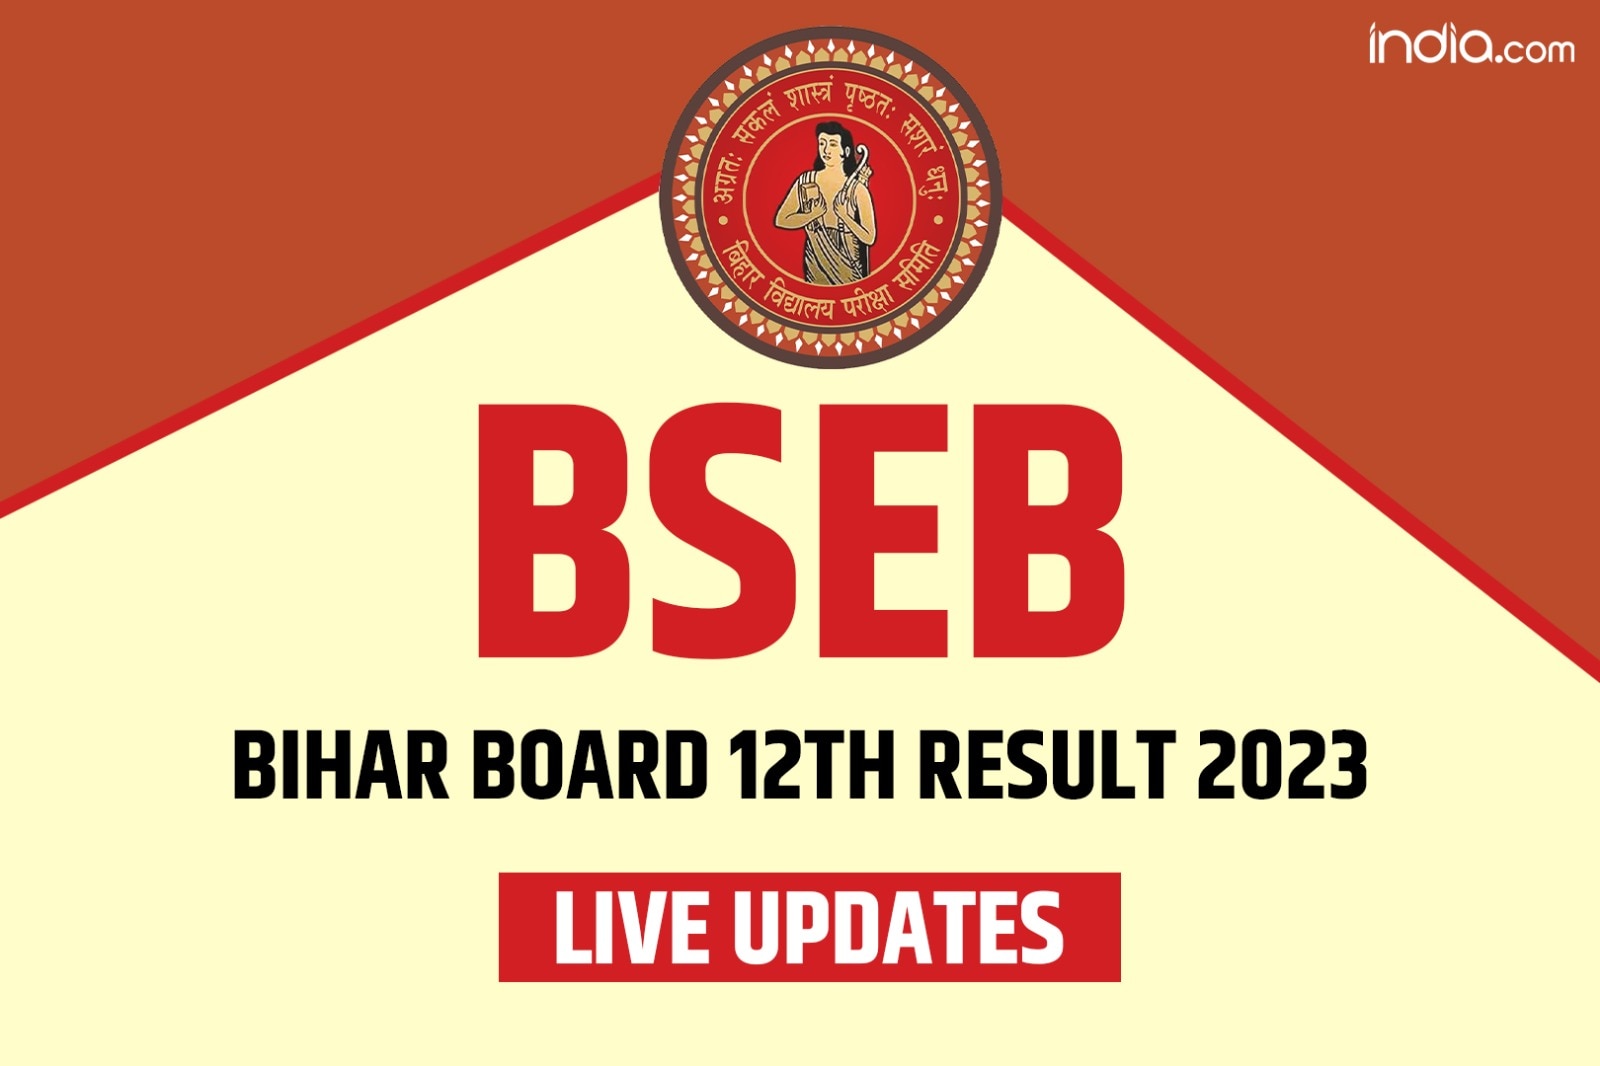 Bihar Board Result Live Updates: This year over 13 lakh students are waiting for the Bihar School Examination Board (BSEB) Class 12 results.